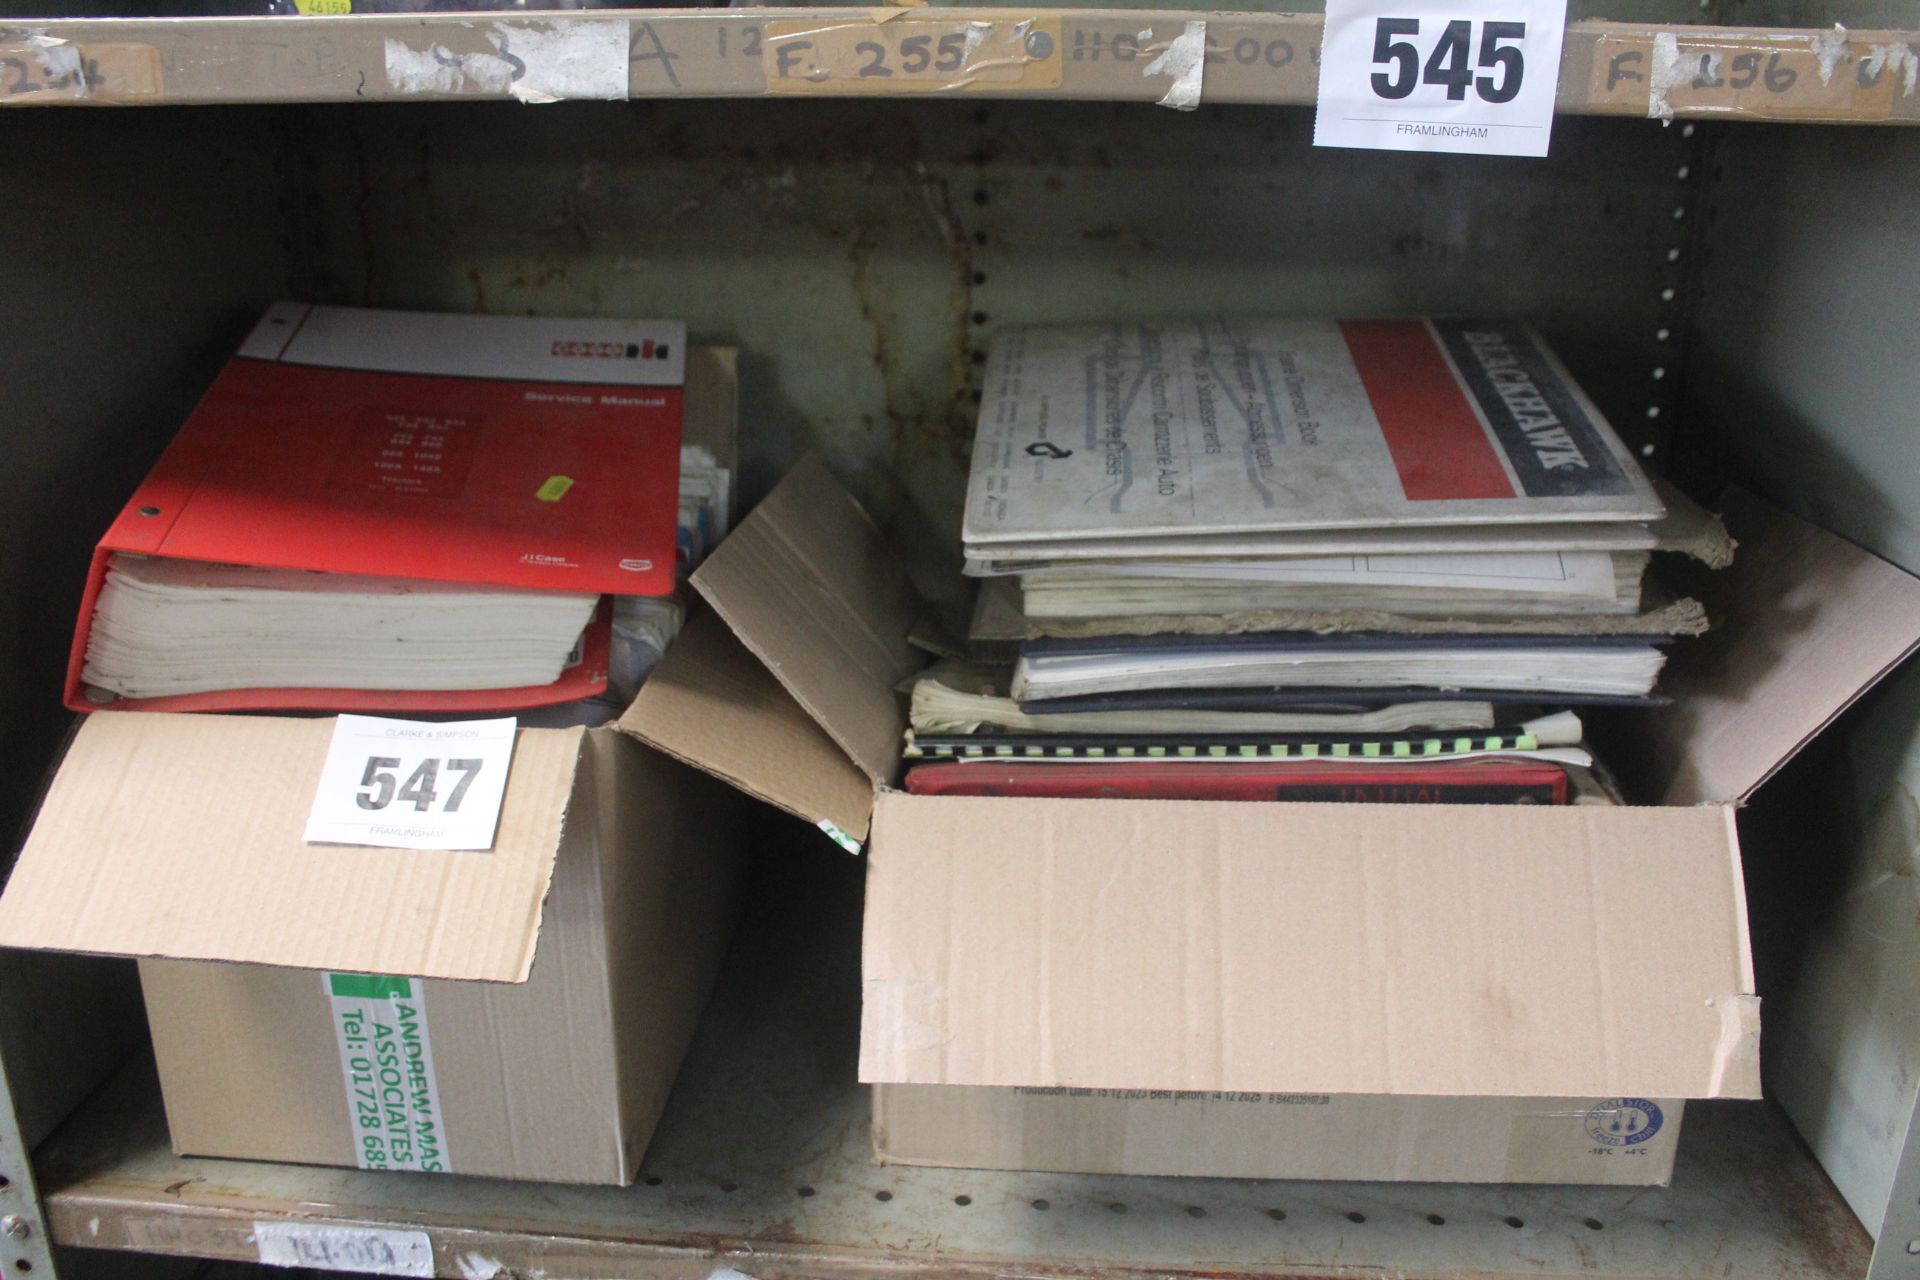 2x boxes of machinery and other manuals. V